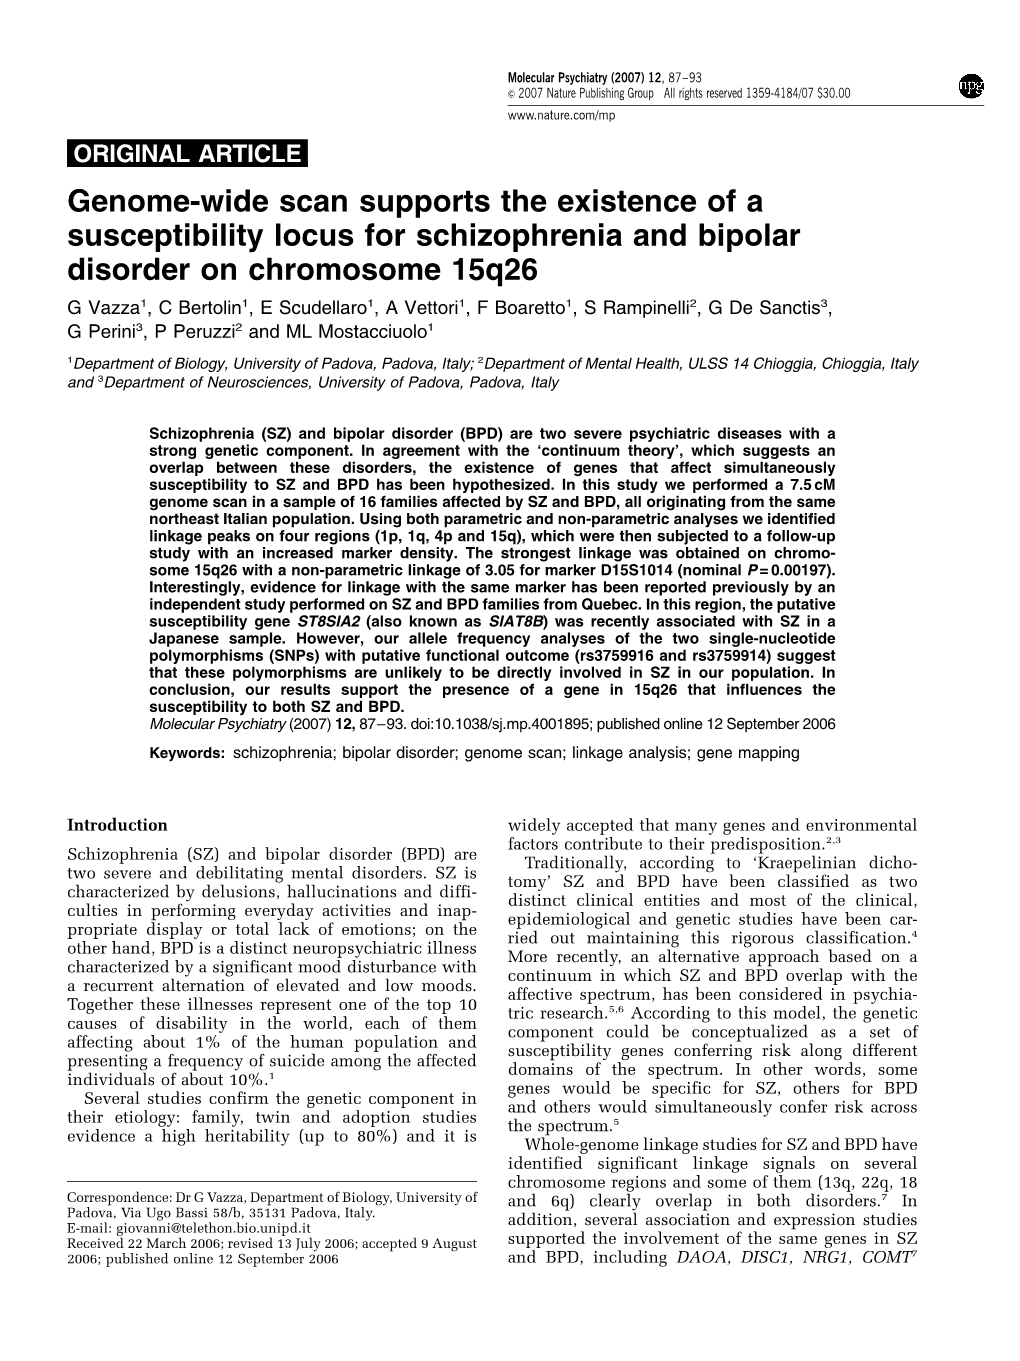 Genome-Wide Scan Supports the Existence of a Susceptibility Locus